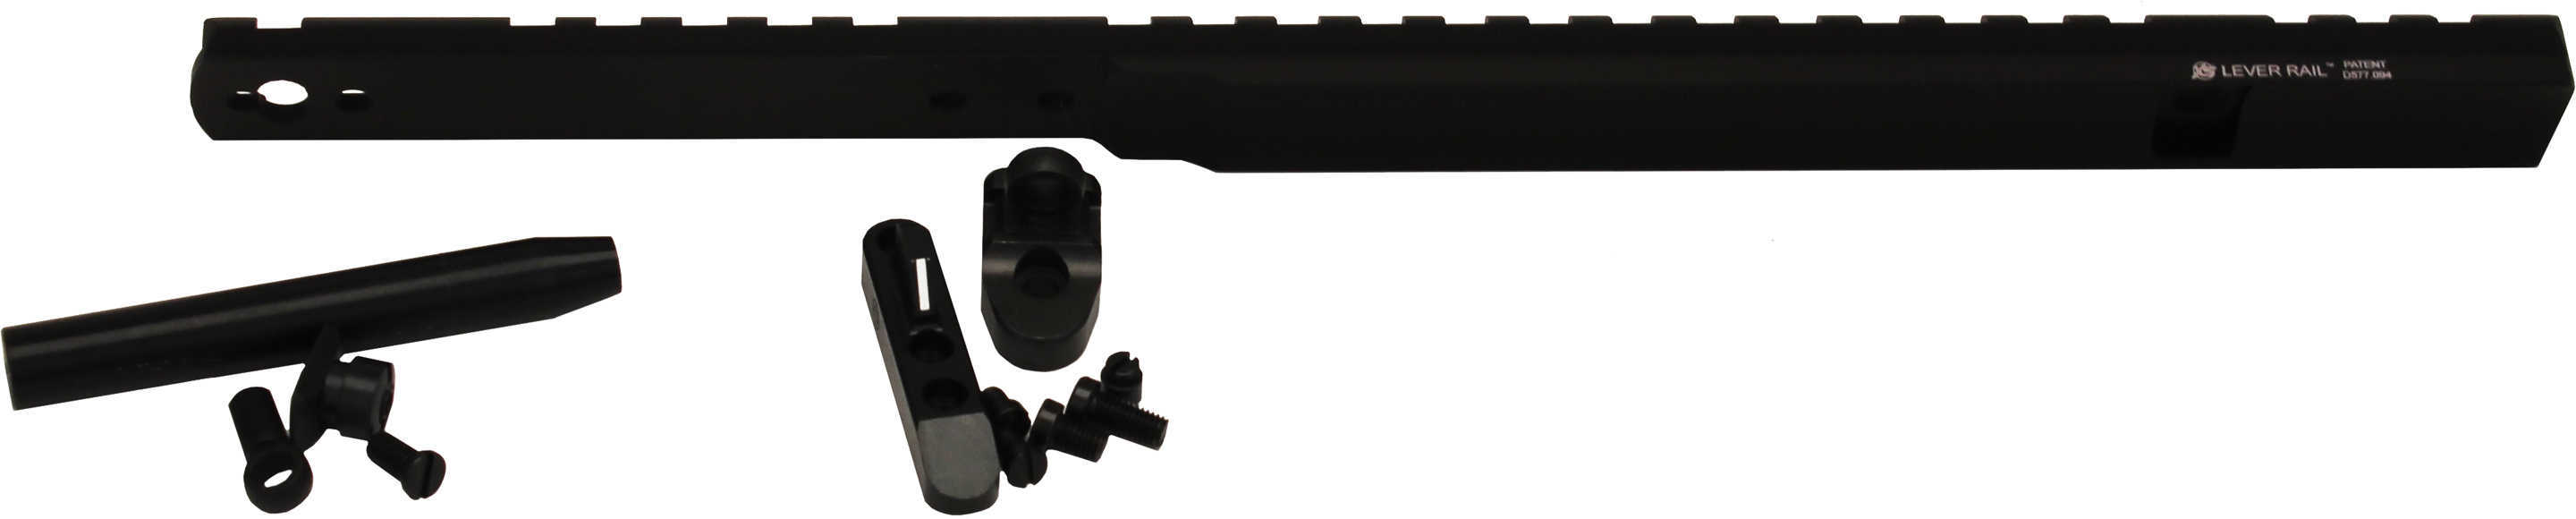 XS Sight Systems Lever Rail Ghost Ring - Marlin 1895 - Sights And Rail / Round Barrel Models